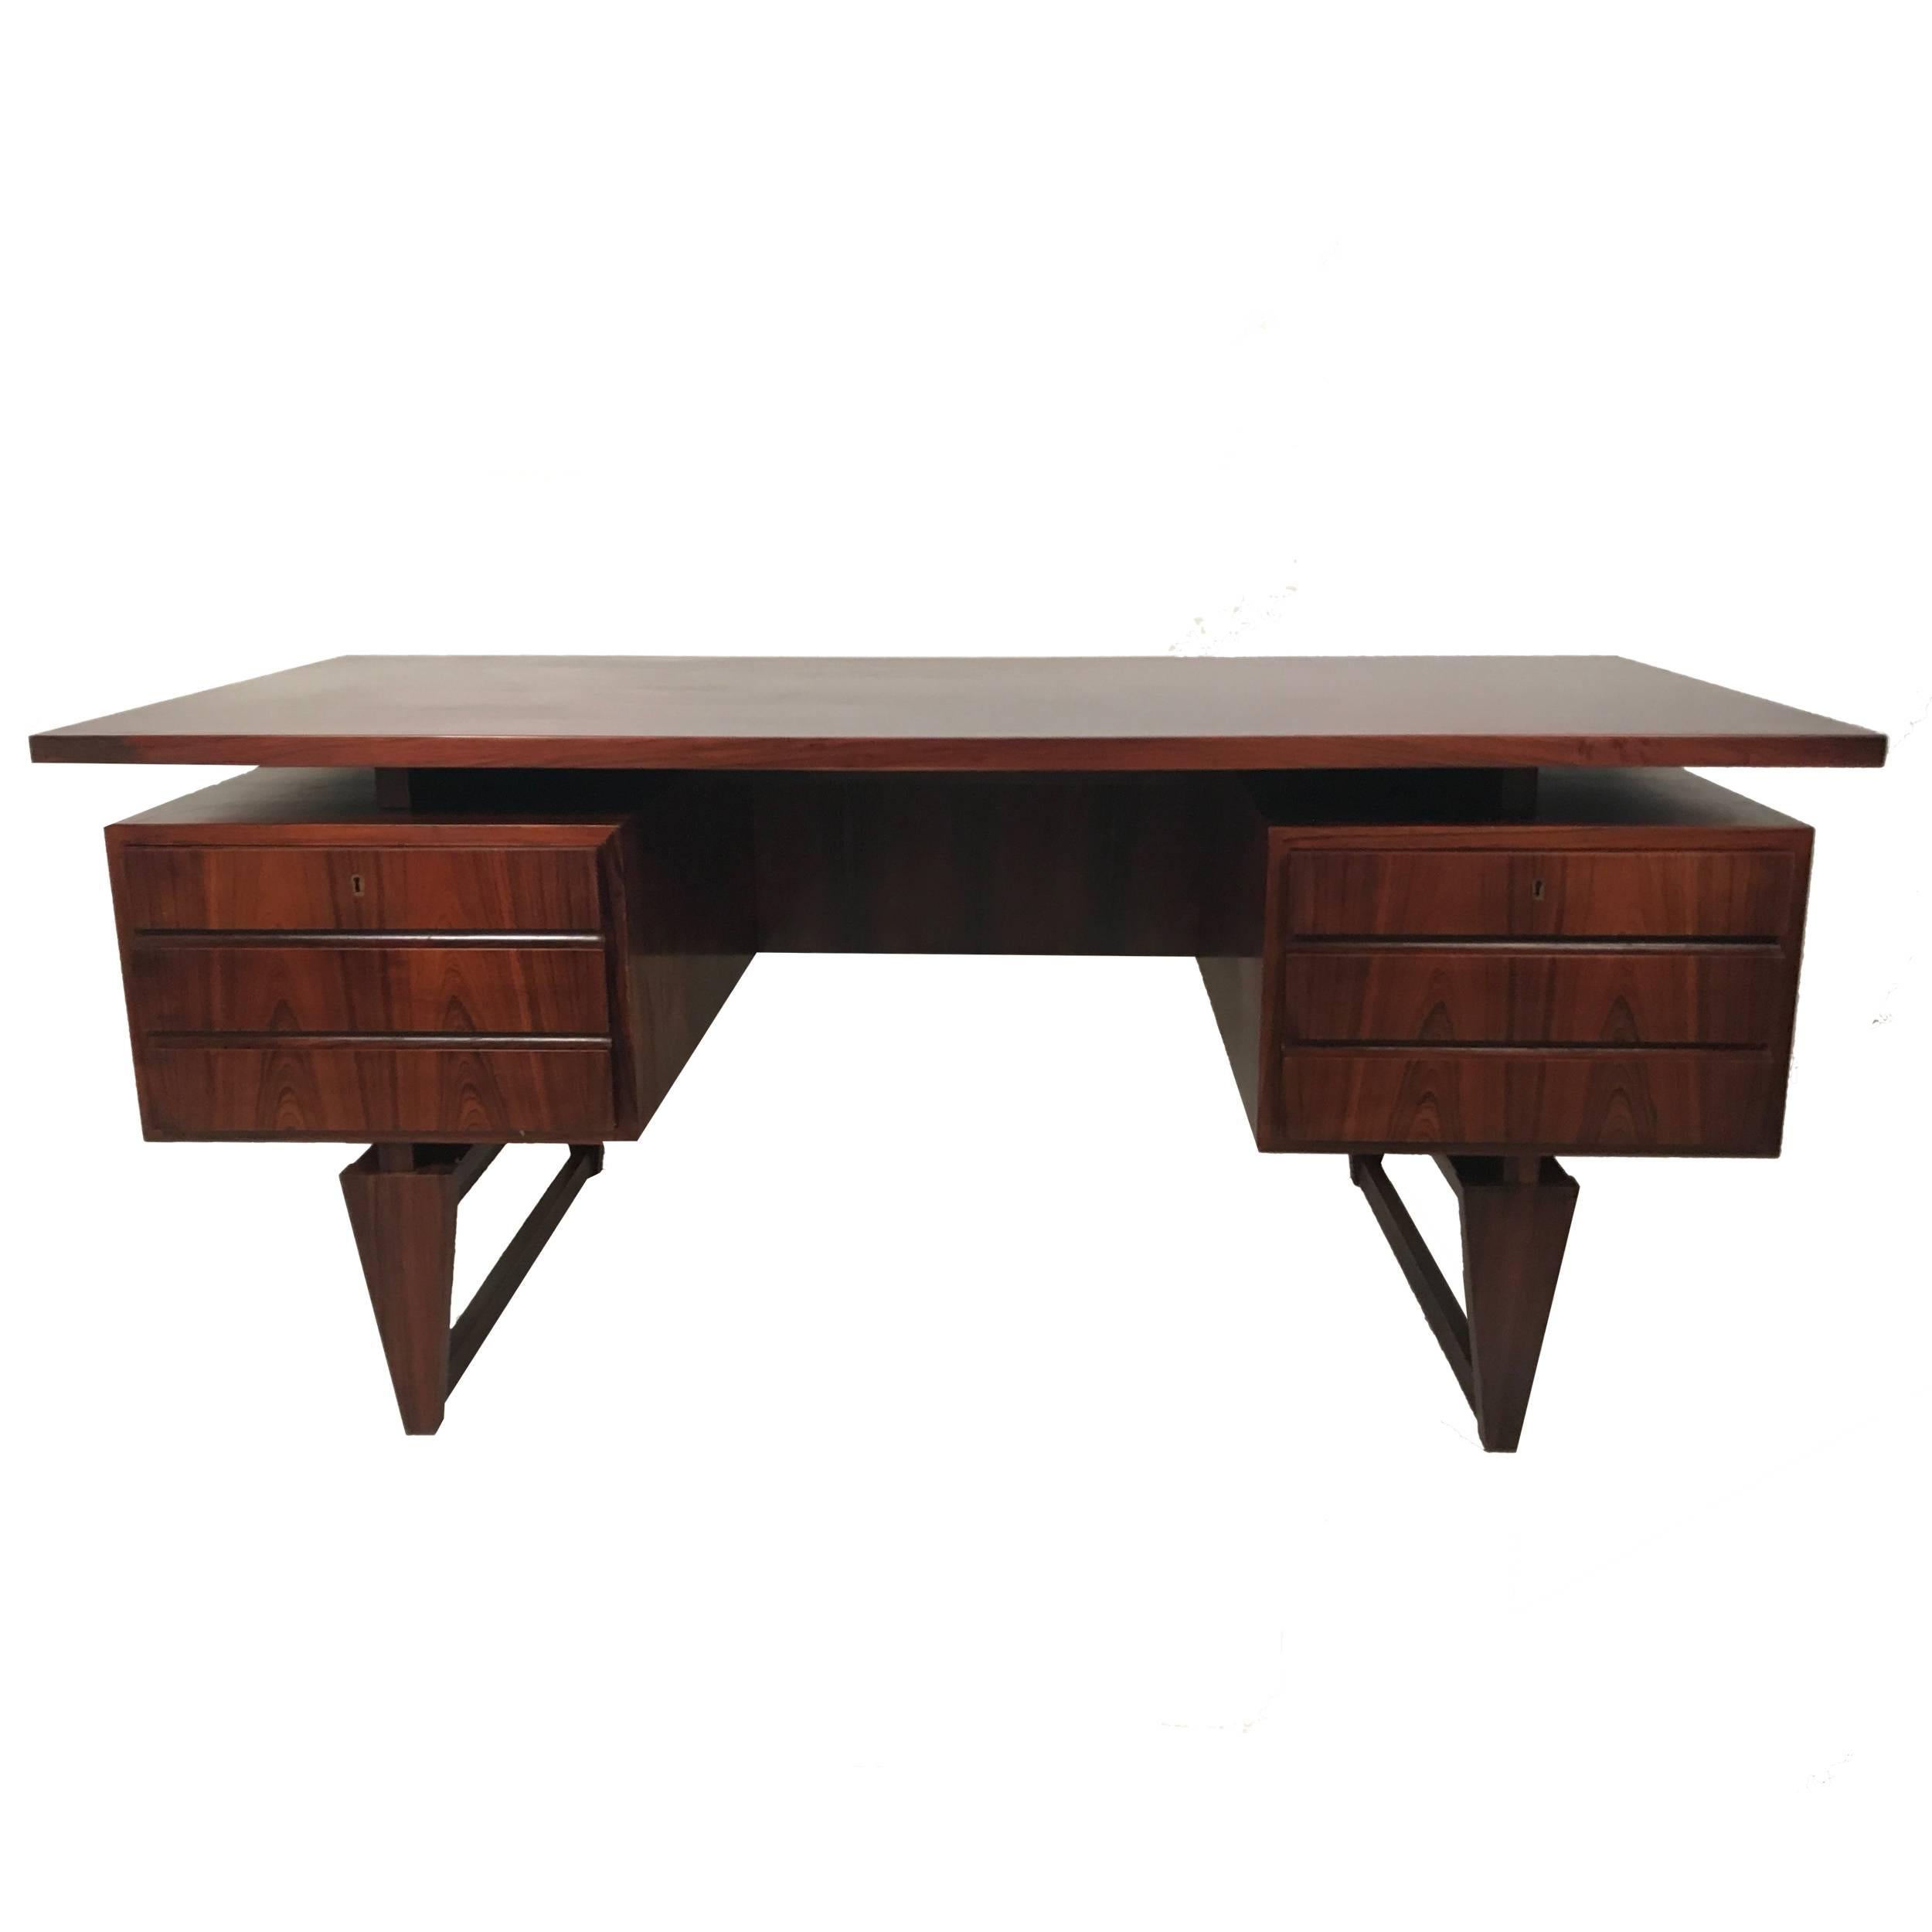 A very sleek exotic desk in rosewood by Illum Wikkelsø with six drawers and a finished back. Very nice original finish with a little shading on top from blotter. Retains original brass key to lock drawers. Absolutely stunning piece!